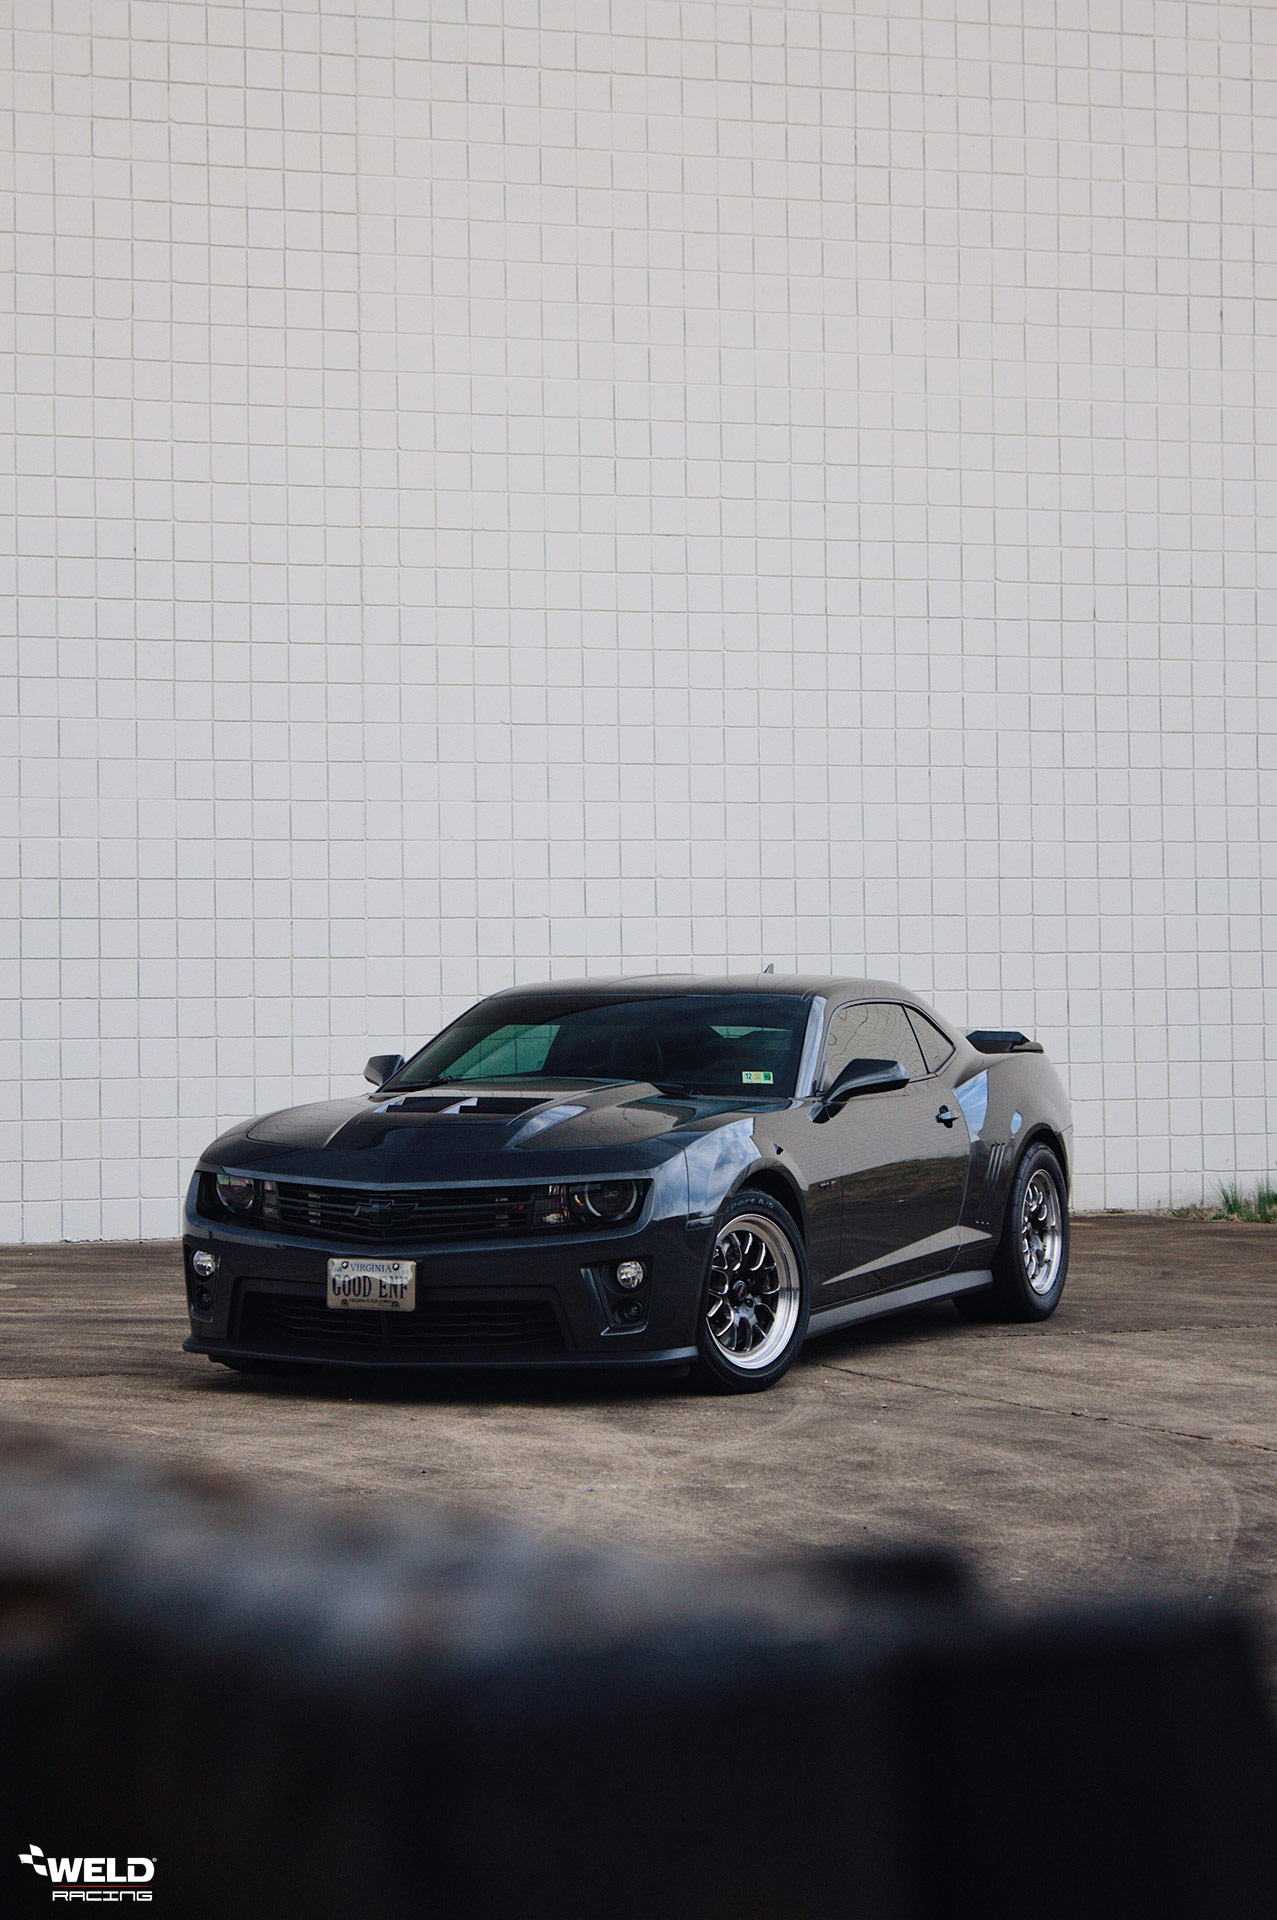 https://d1z96aq5oohl6o.cloudfront.net/wp-content/uploads/2019/04/gray-camaro-zl1-customized-chevrolet-aftermarket-drag-racing-rims-weld-wheels-a.jpg